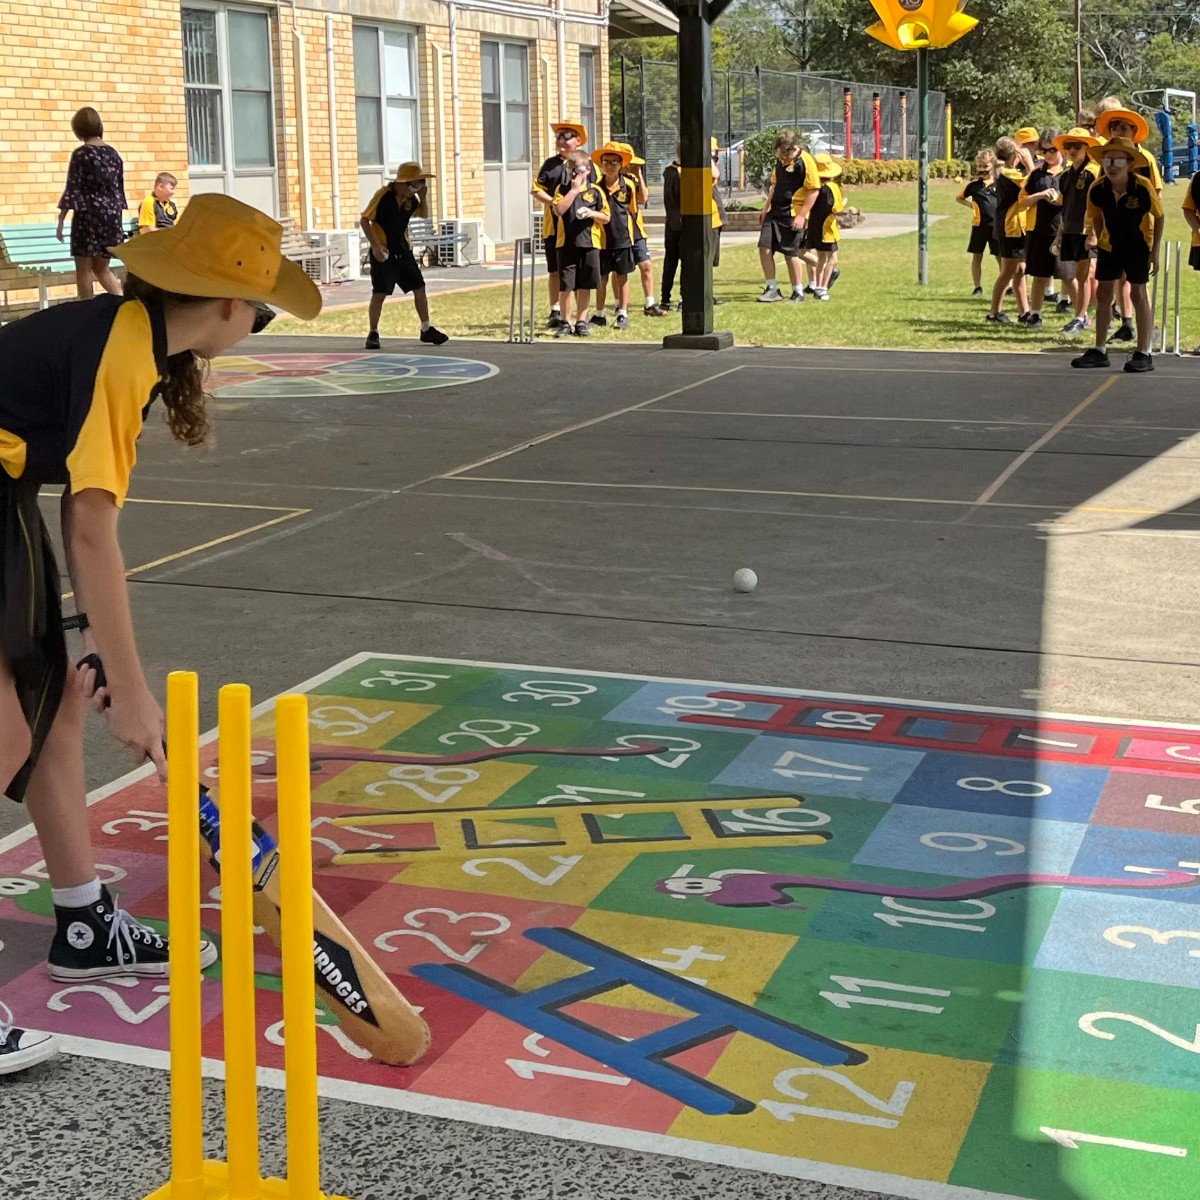 Howzat! 🏏 Somersby Public School students were bowled over by blind cricket, a disability awareness activity delivered by Scott Jones, former captain of the NSW Blind Cricket team. Read more here 👉 brnw.ch/21wJBsN #DisabilityRecognitionWeek